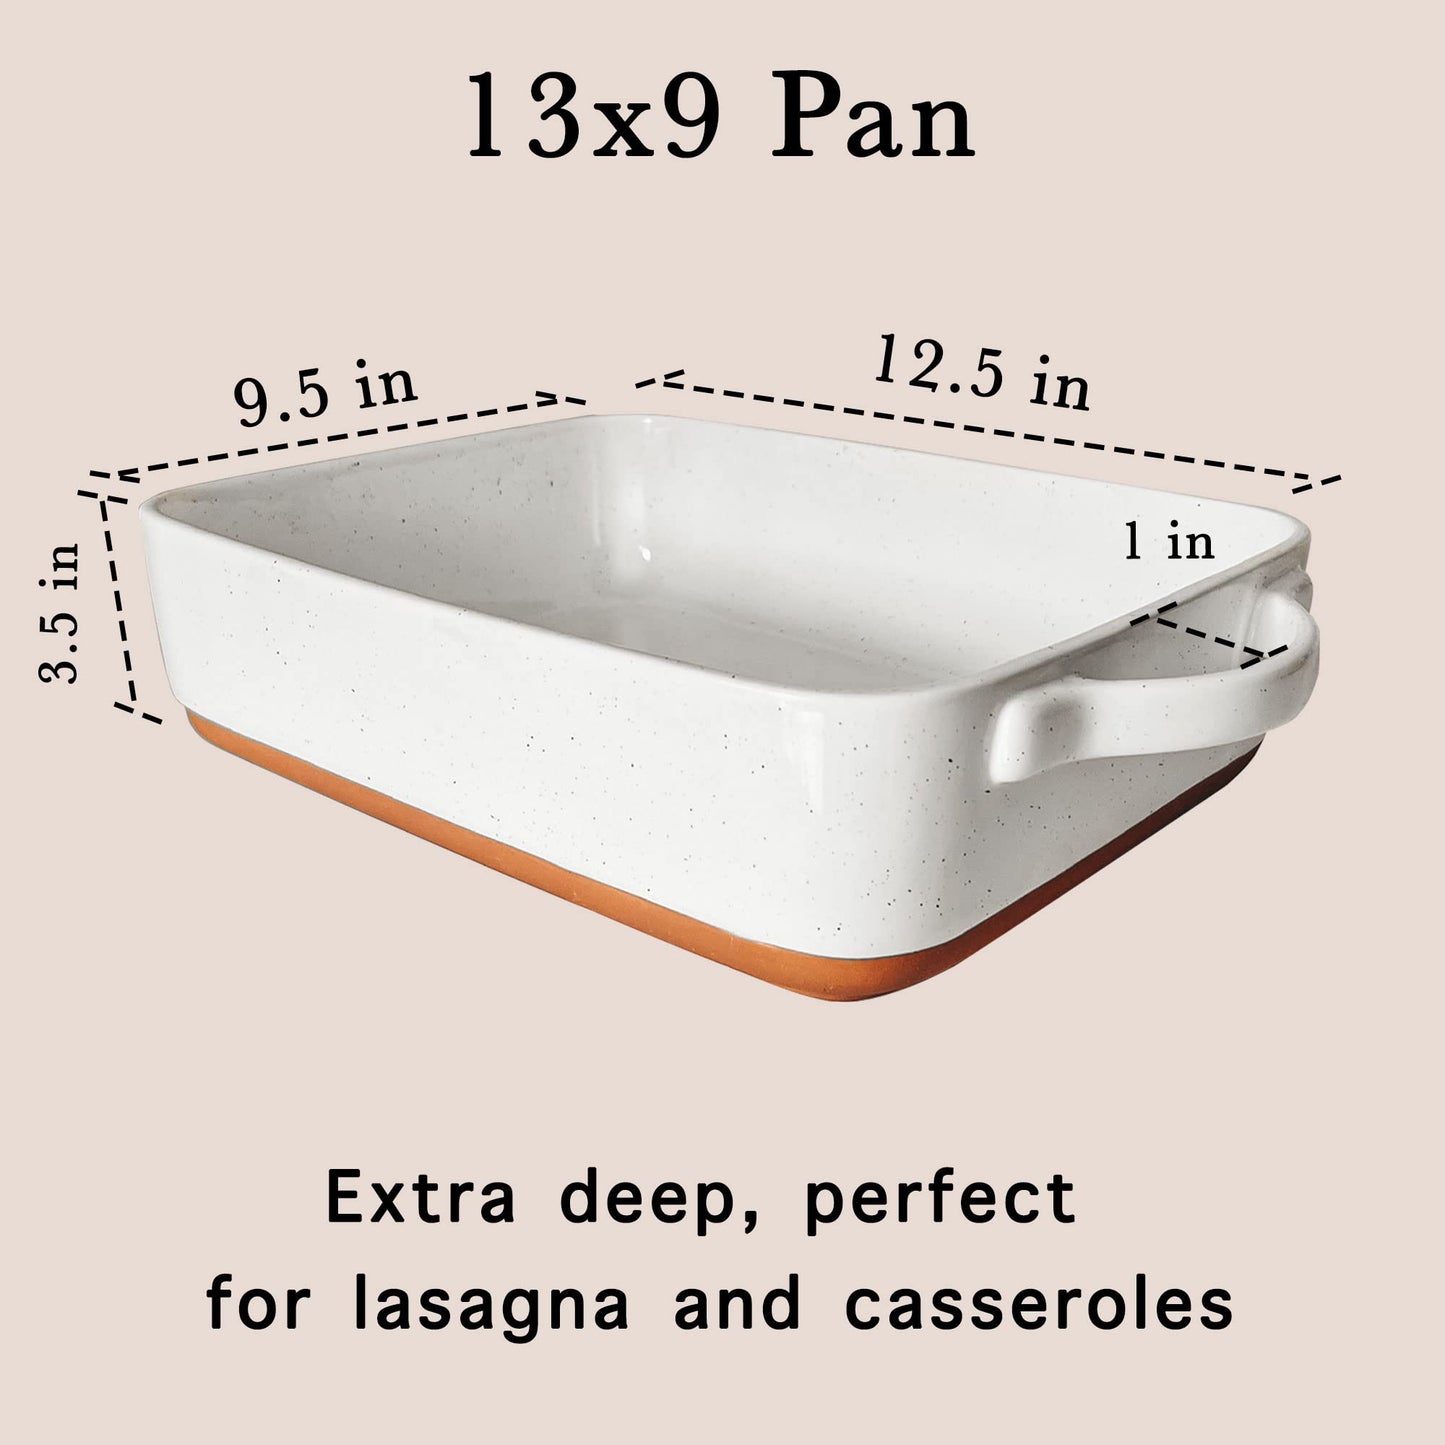 Mora 9x13in Porcelain Baking Dish - Oven to Table, Freezer Safe